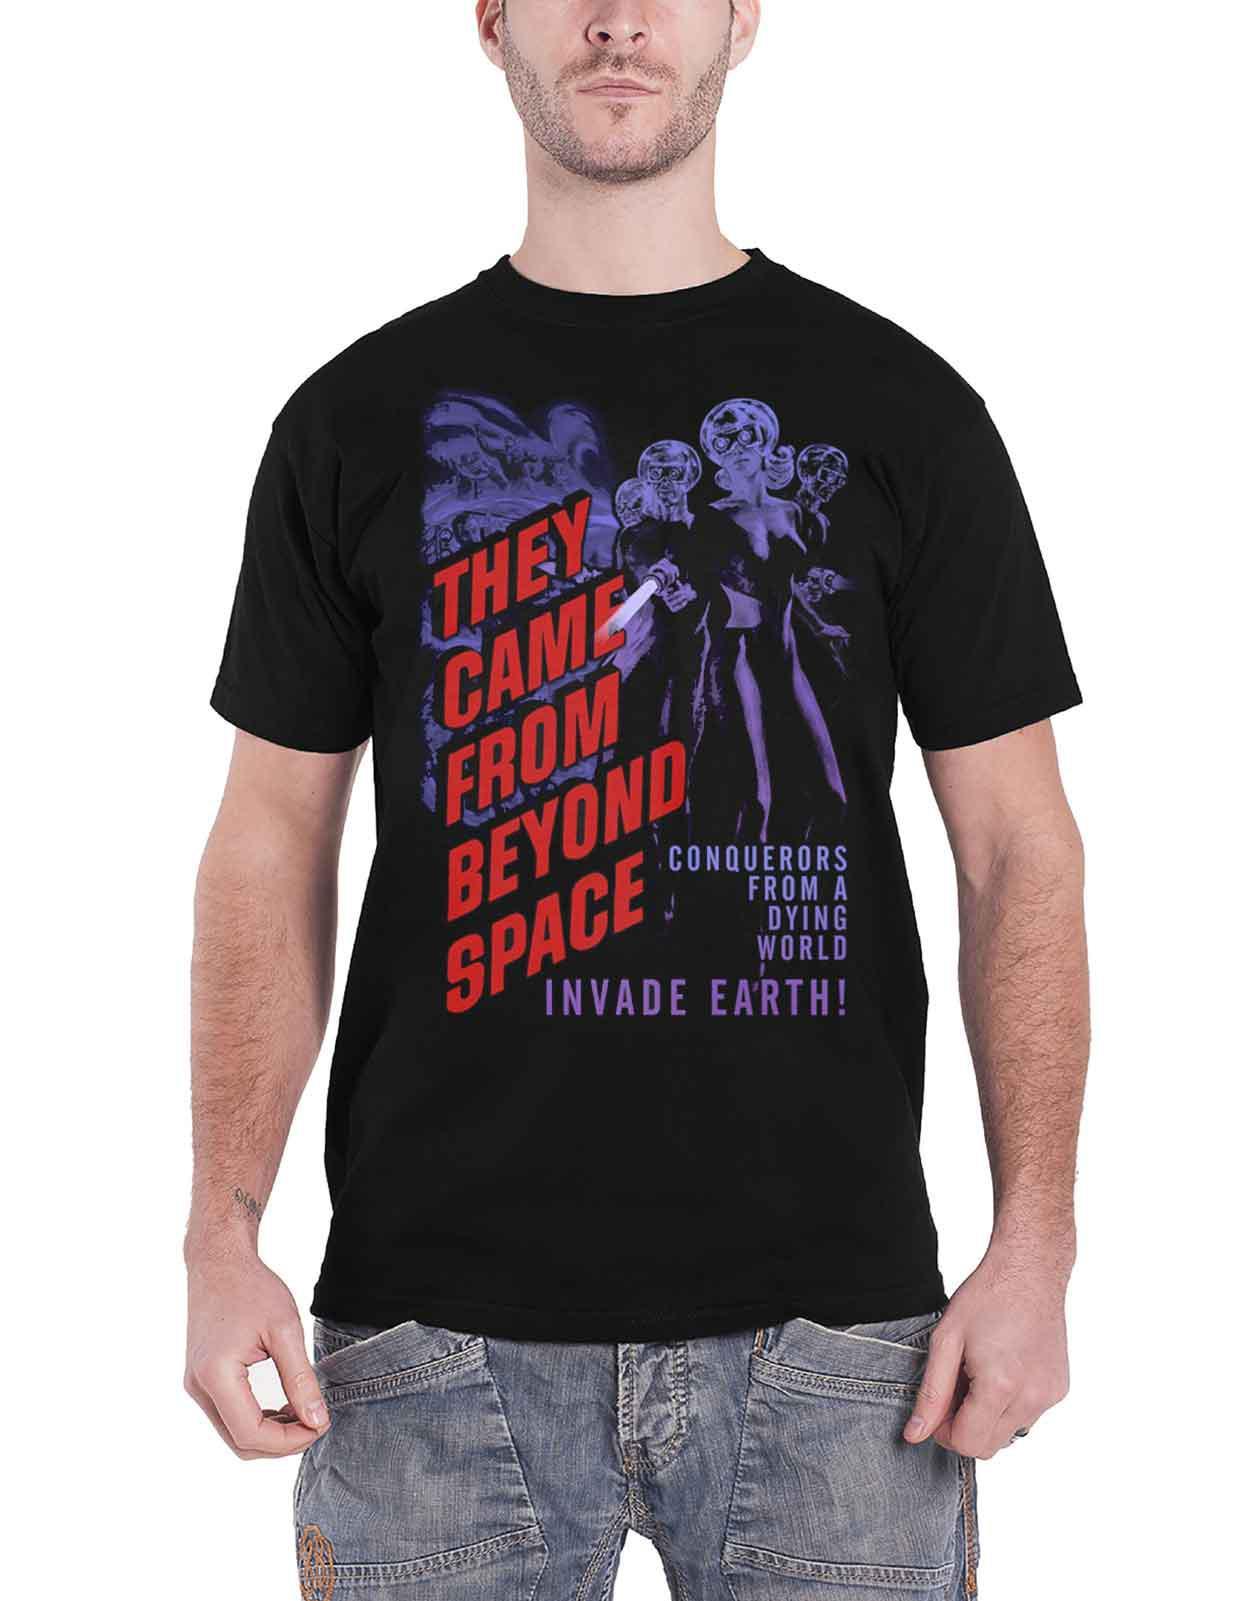 They Came From Beyond Space T Shirt Vintage Movie new Official Mens Black